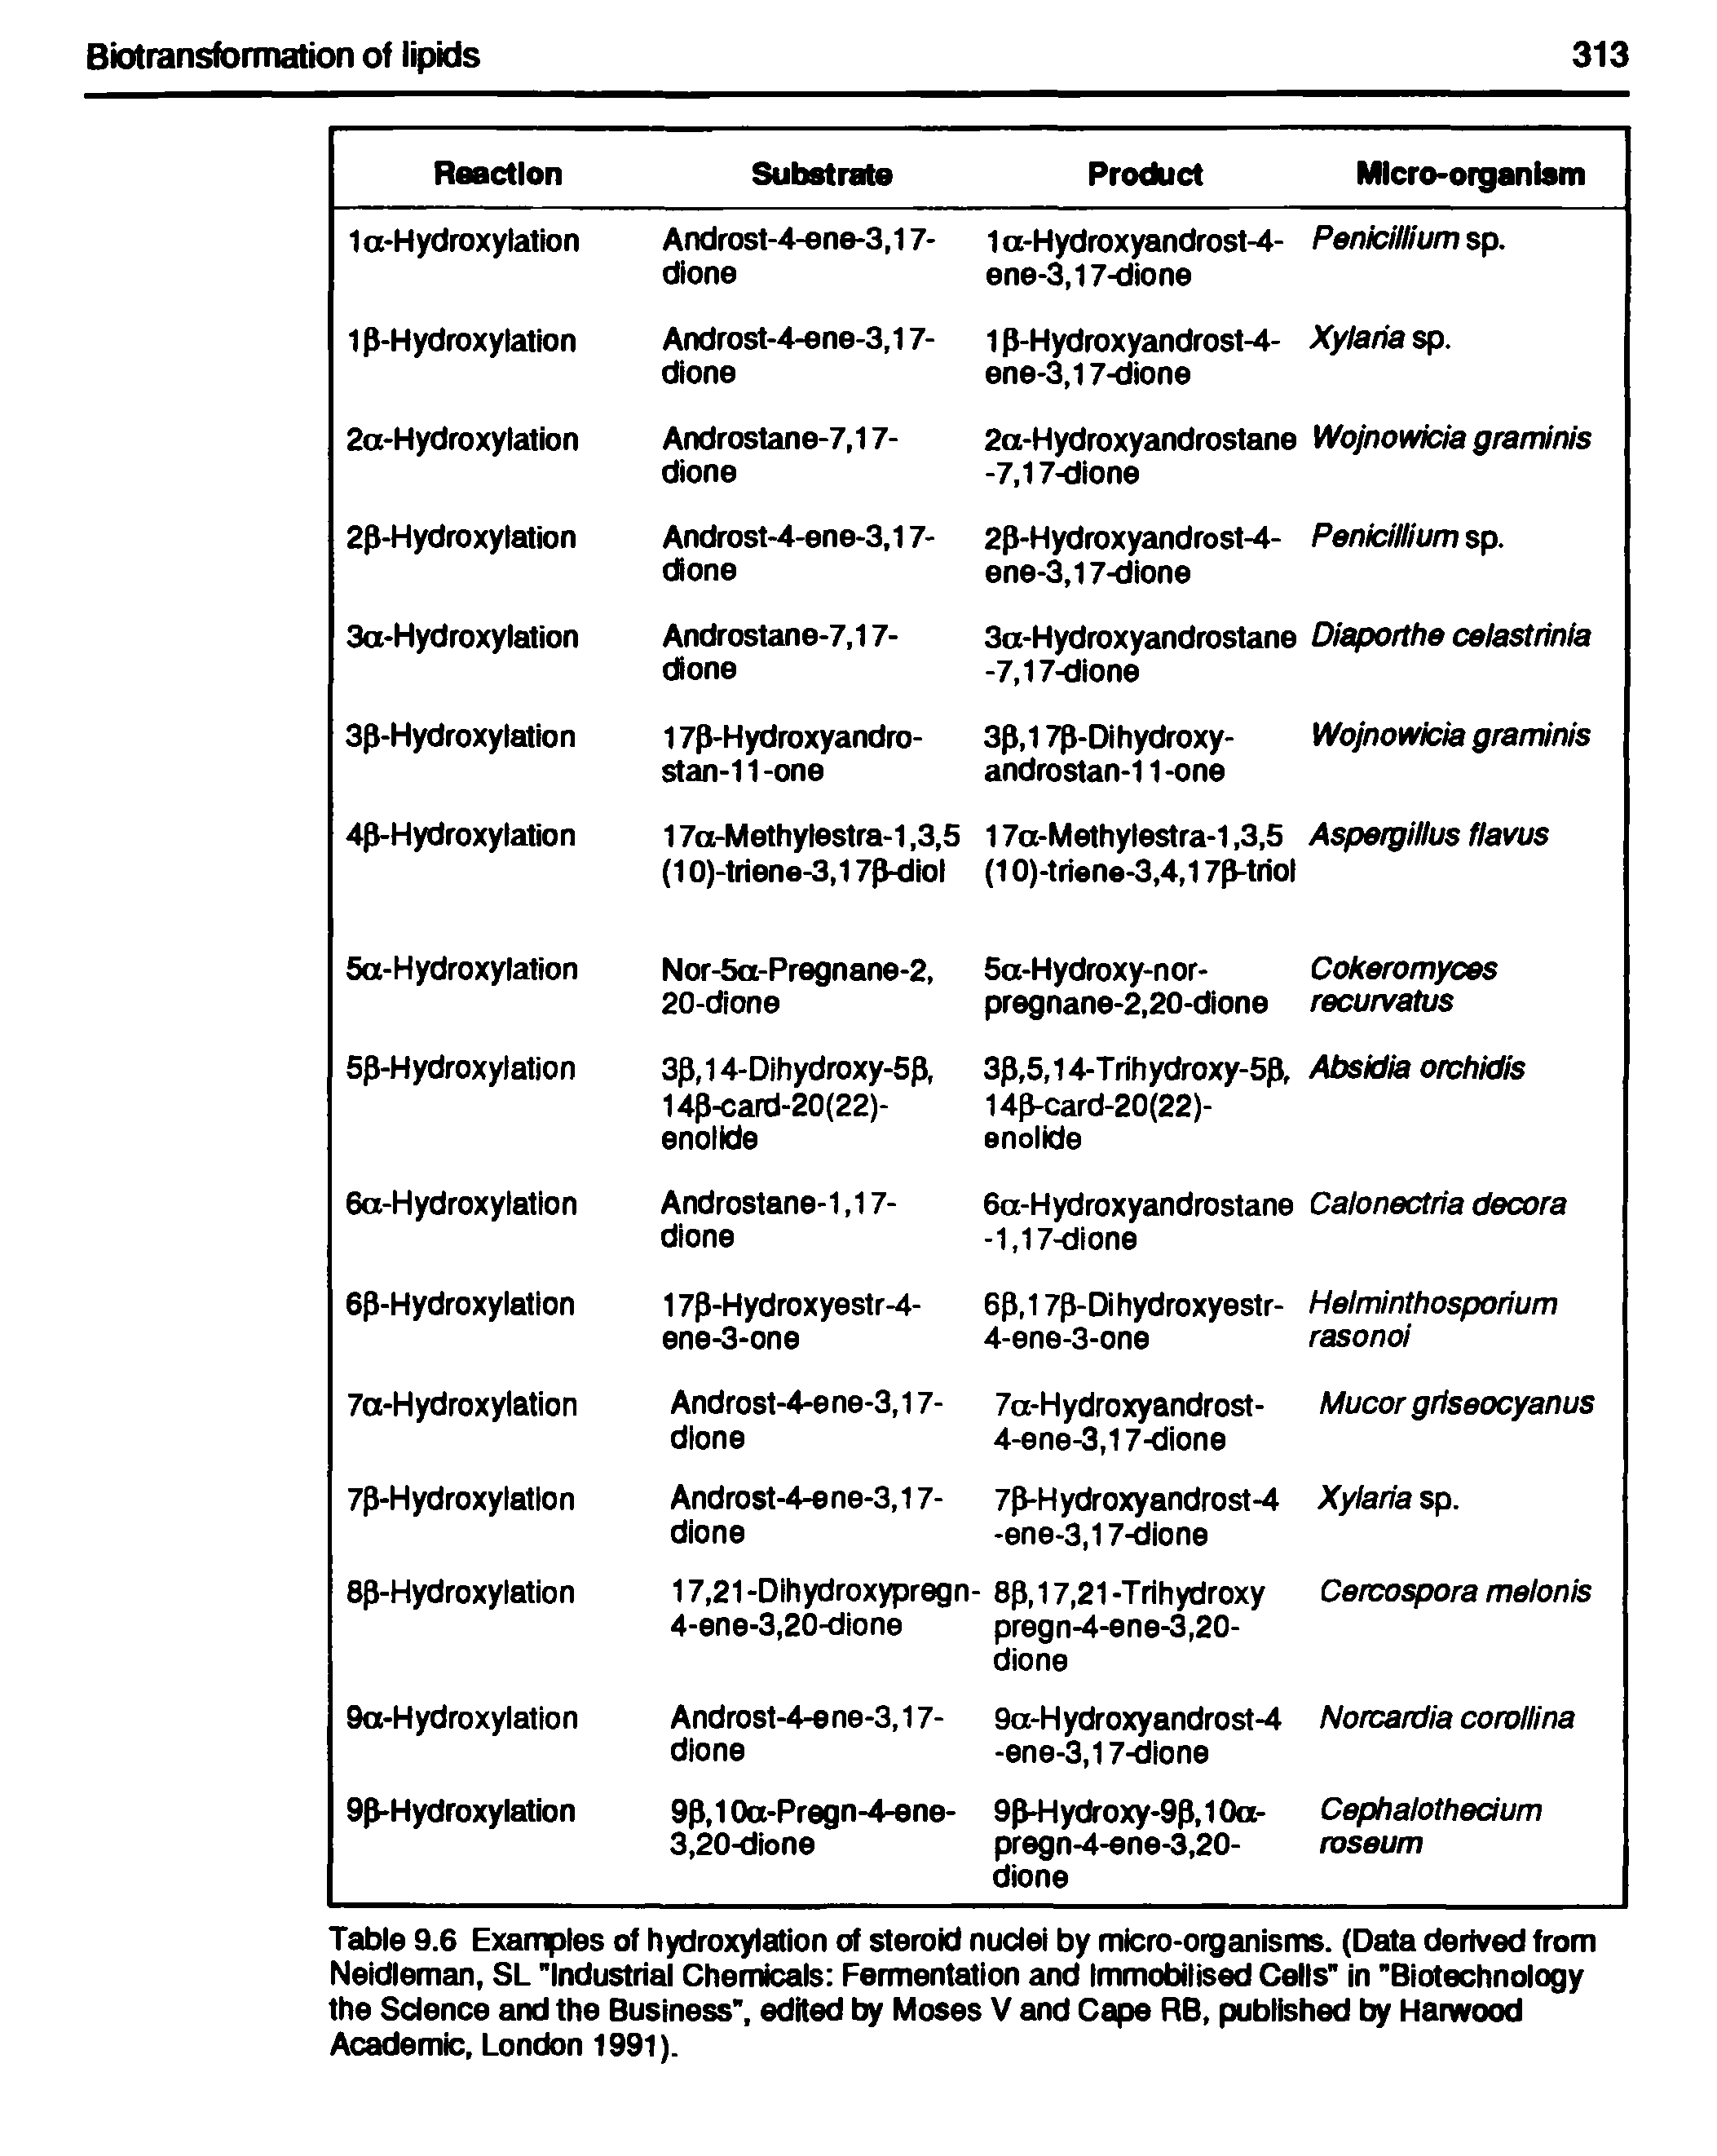 Table 9.6 Examples of hydroxylation of steroid nuclei by micro-organisms. (Data derived from Neidleman, SL "Industrial Chemicals Fermentation and Immobilised Cells" in "Biotechnology the Science and the Business", edited by Moses V and Cape RB, published by Harwood Academic, London 1991).